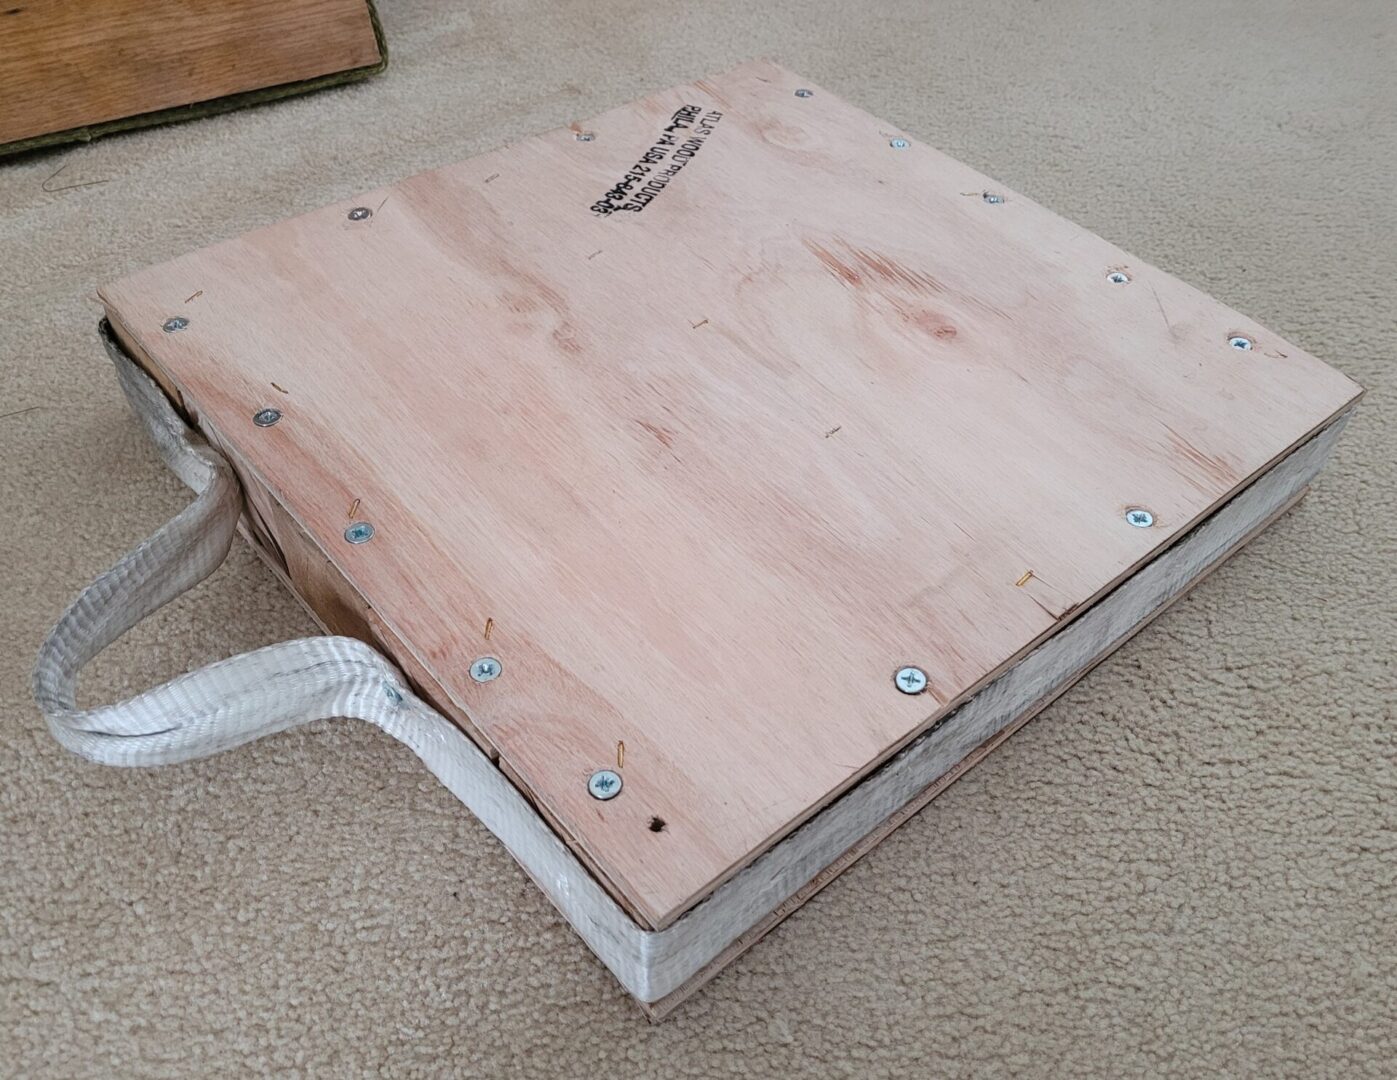 plywood pad 3 inch laying down 2